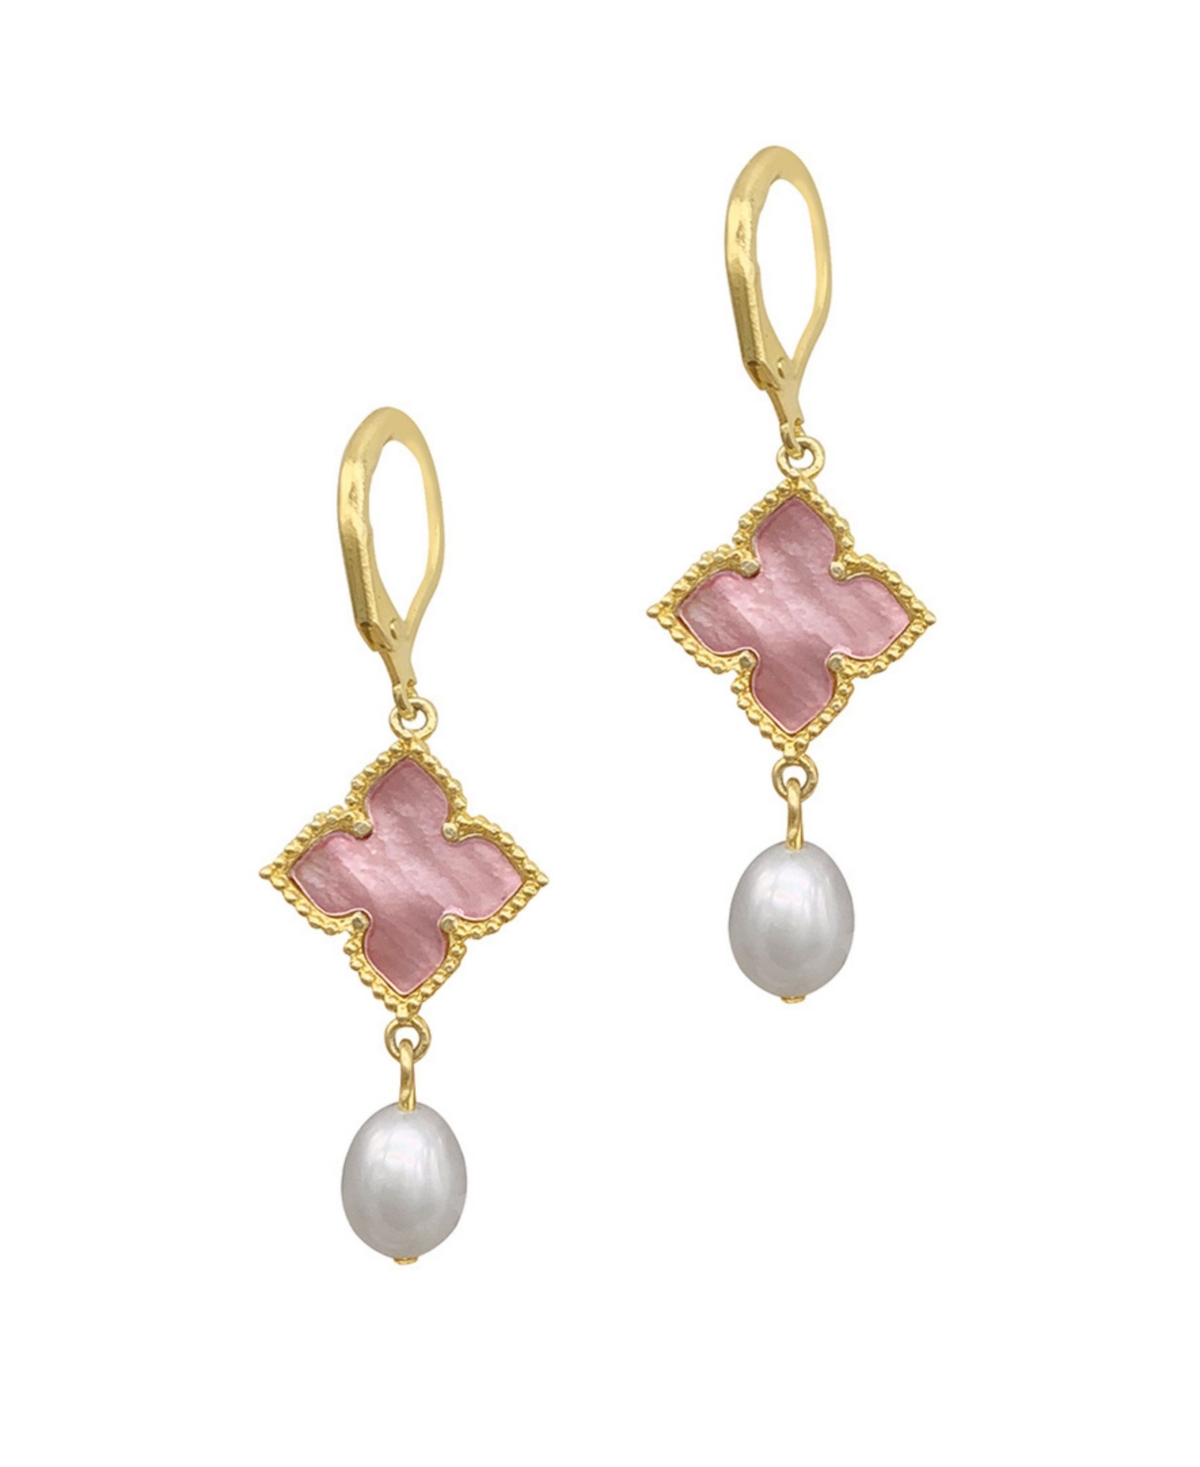 Shop Adornia 14k Gold Plated Floral And Pearl Drop Earrings Pink Imitation Mother Of Pearl